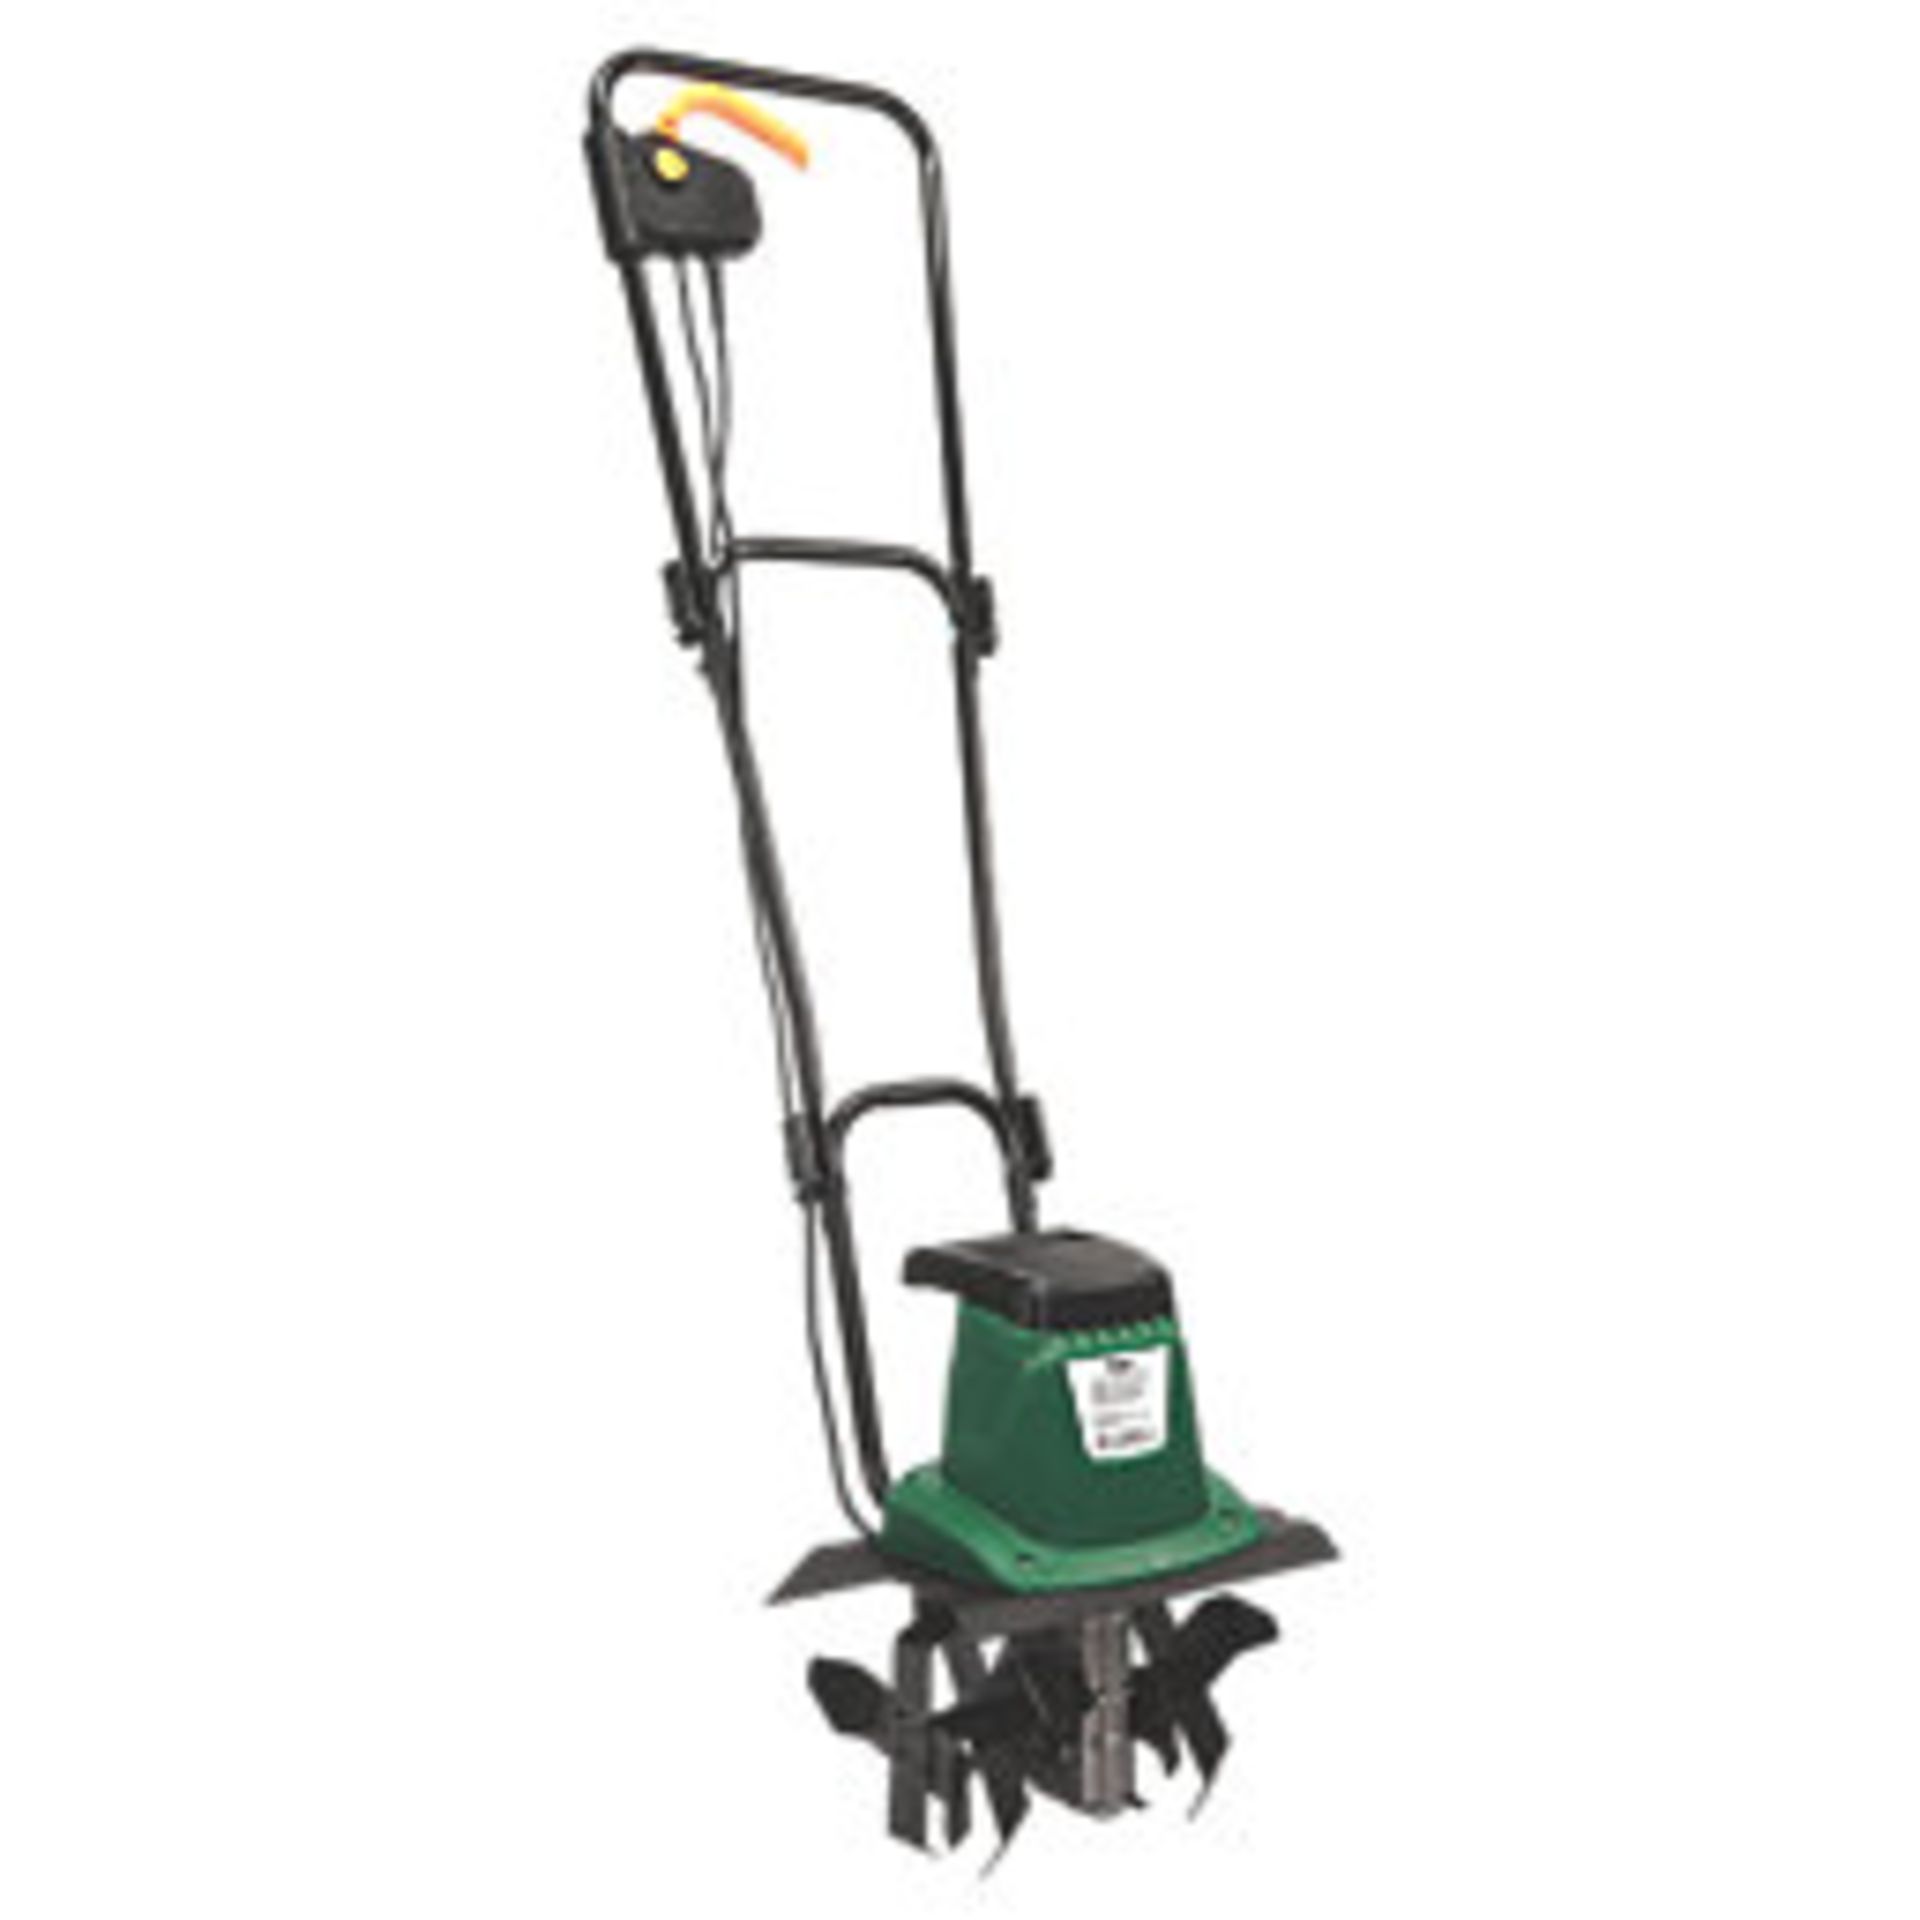 800W 28CM TILLER 220-240V. - P3. Foldable handle for easy transportation and compact storage. Dual-